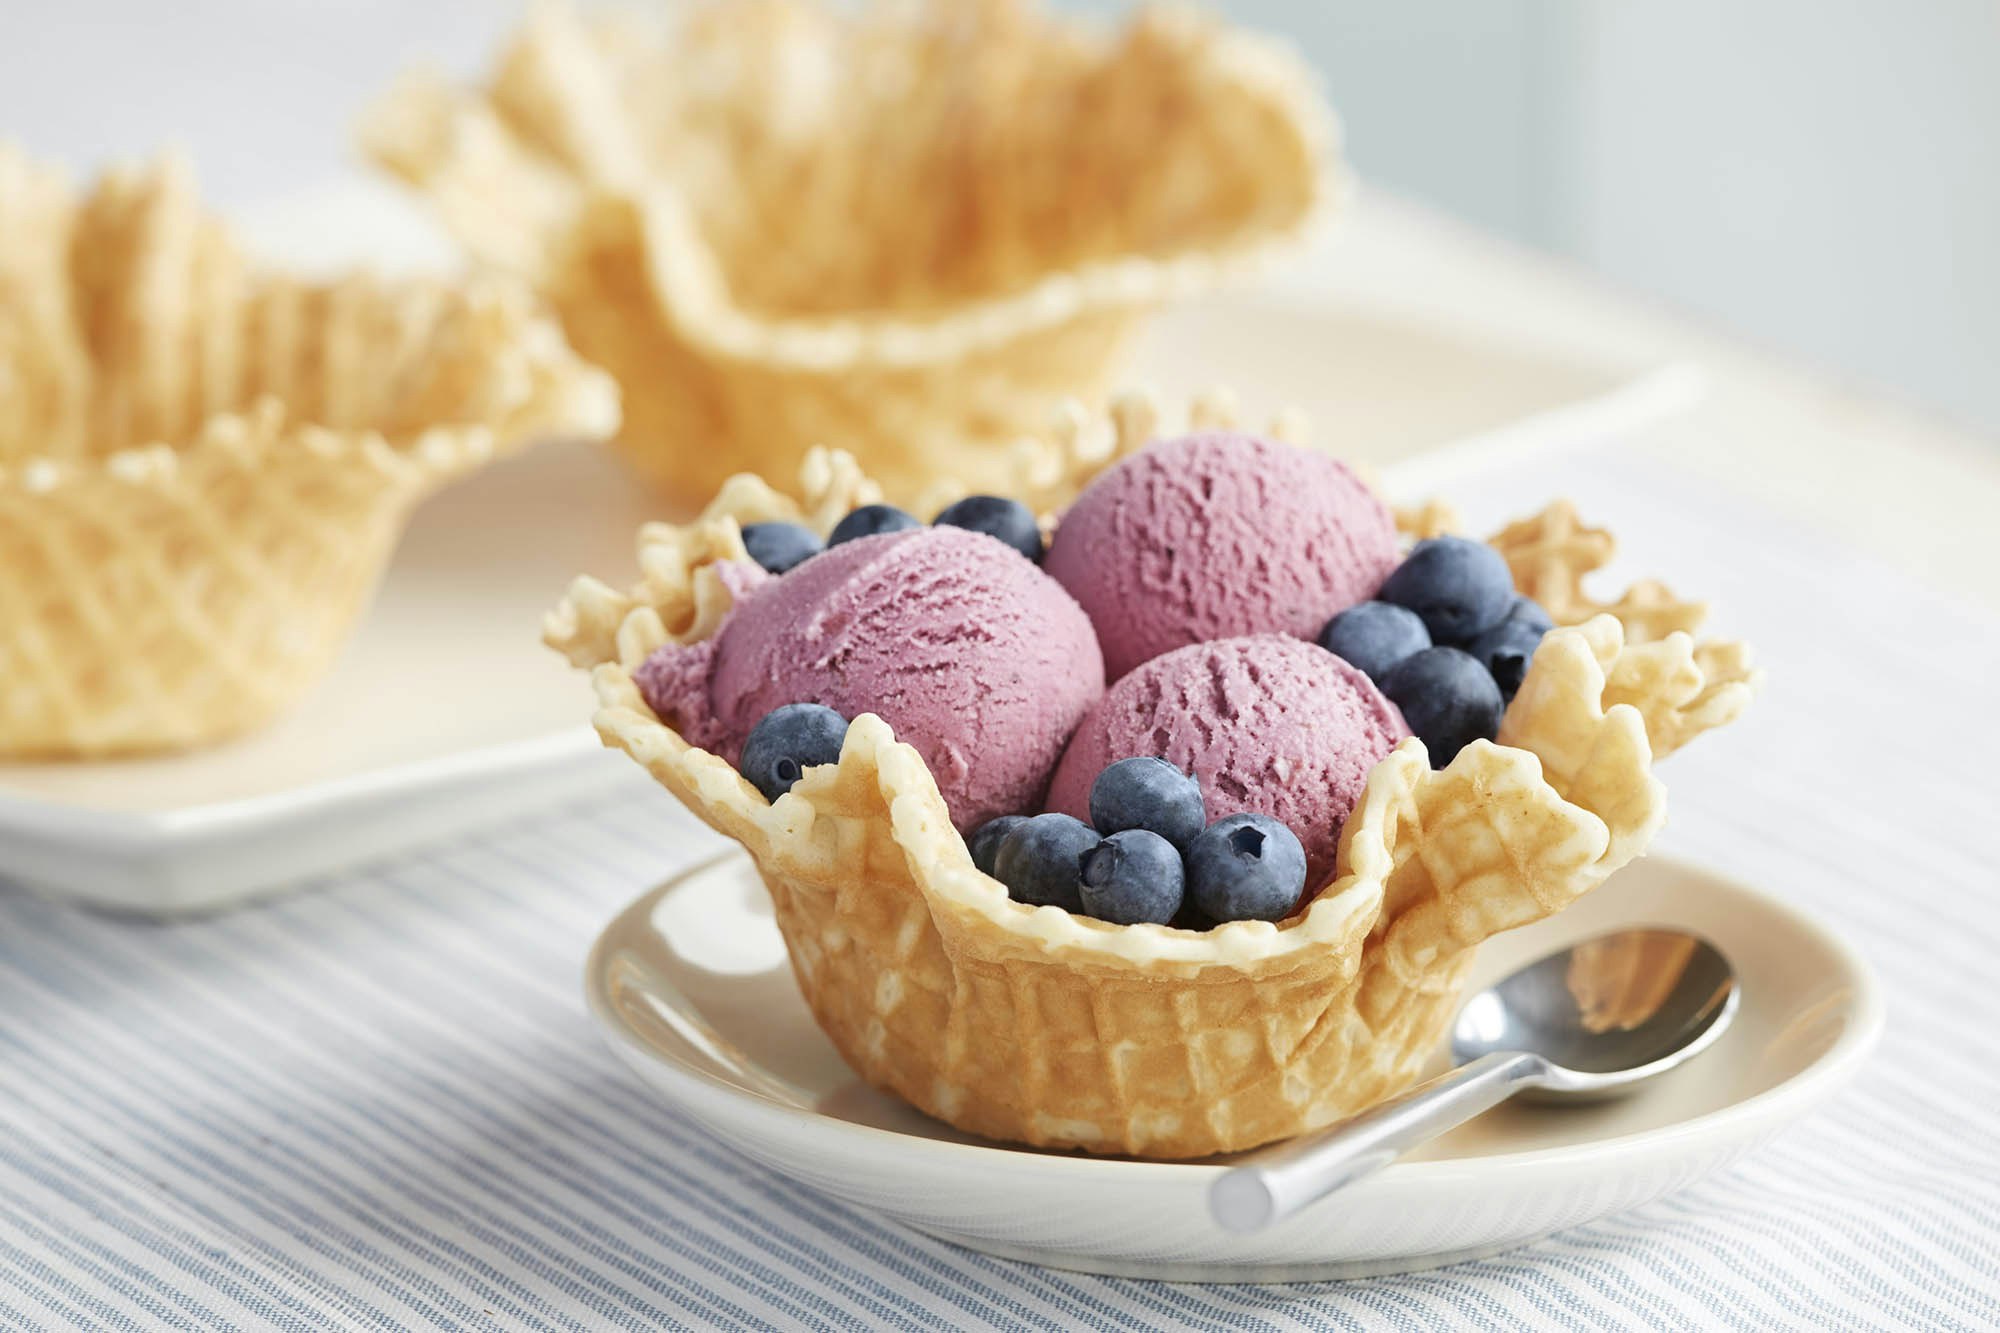 A waffle cone with scoops of blueberry ice cream and blueberries